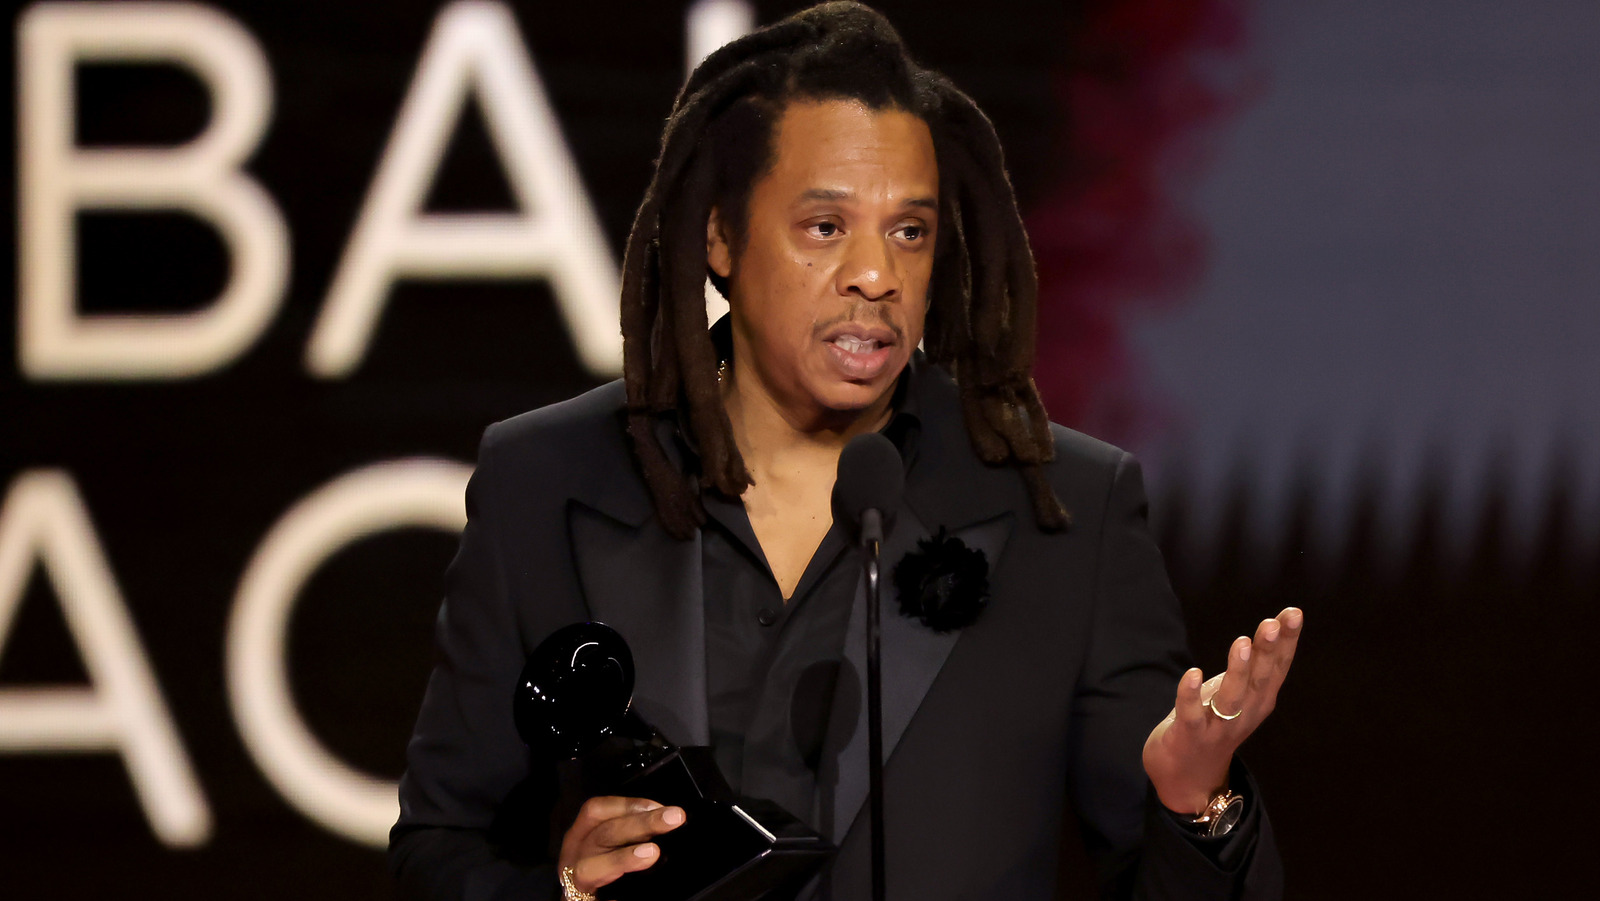 The Real Reason Jay-Z Has Beef With The Academy Behind The Grammys